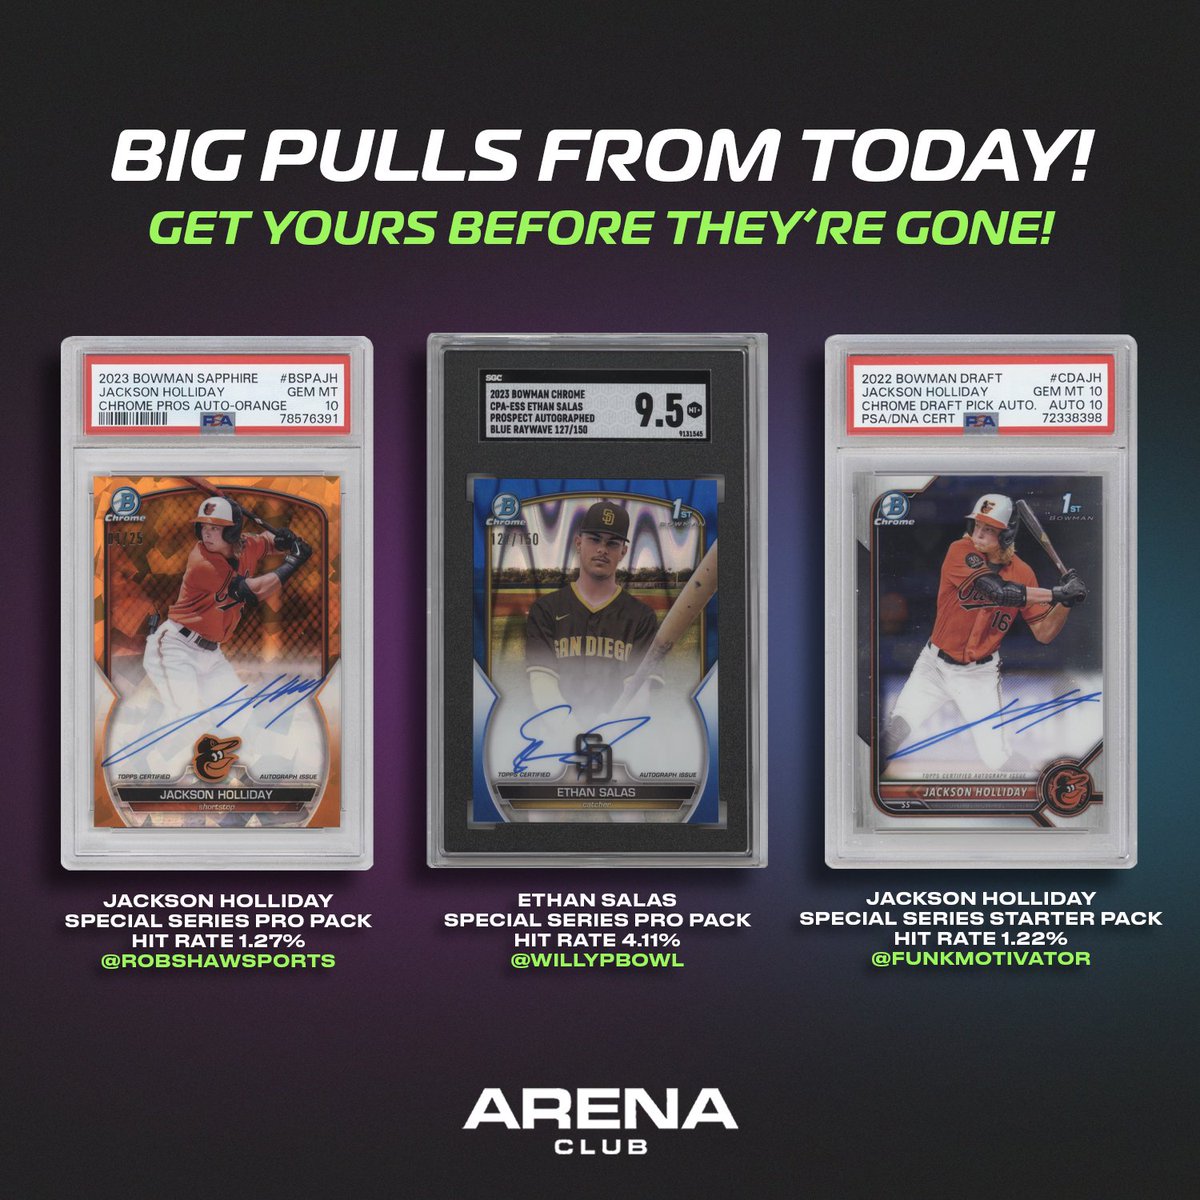 HUGE cards are being pulled from today's drop! 🤯 . Get yours now before they're gone! 🚨 . #arenaclub #slabpacks